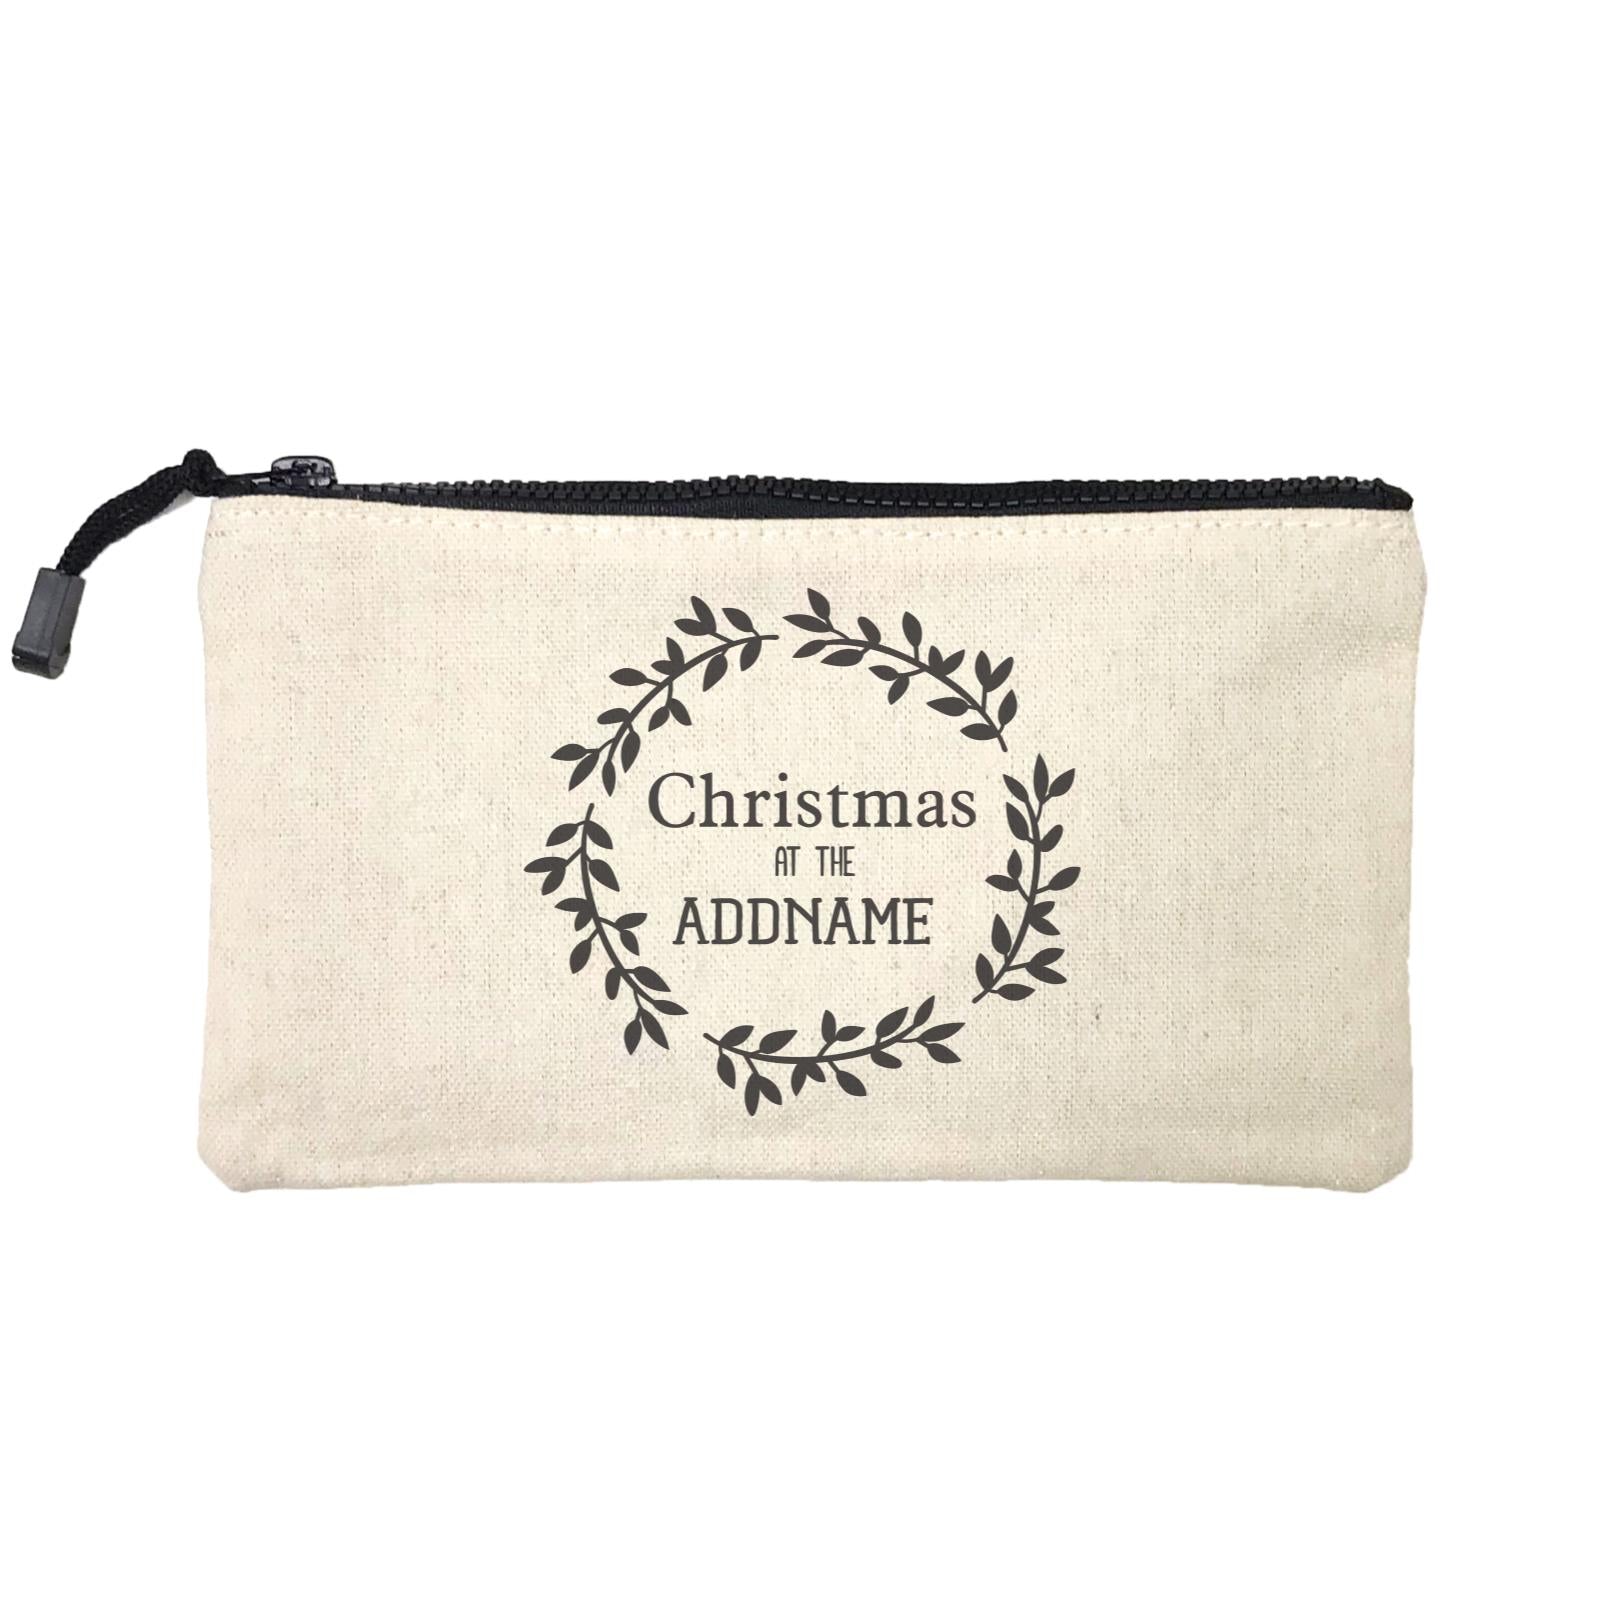 Xmas Christmas At The Flower Wreath Mini Accessories Stationery Pouch